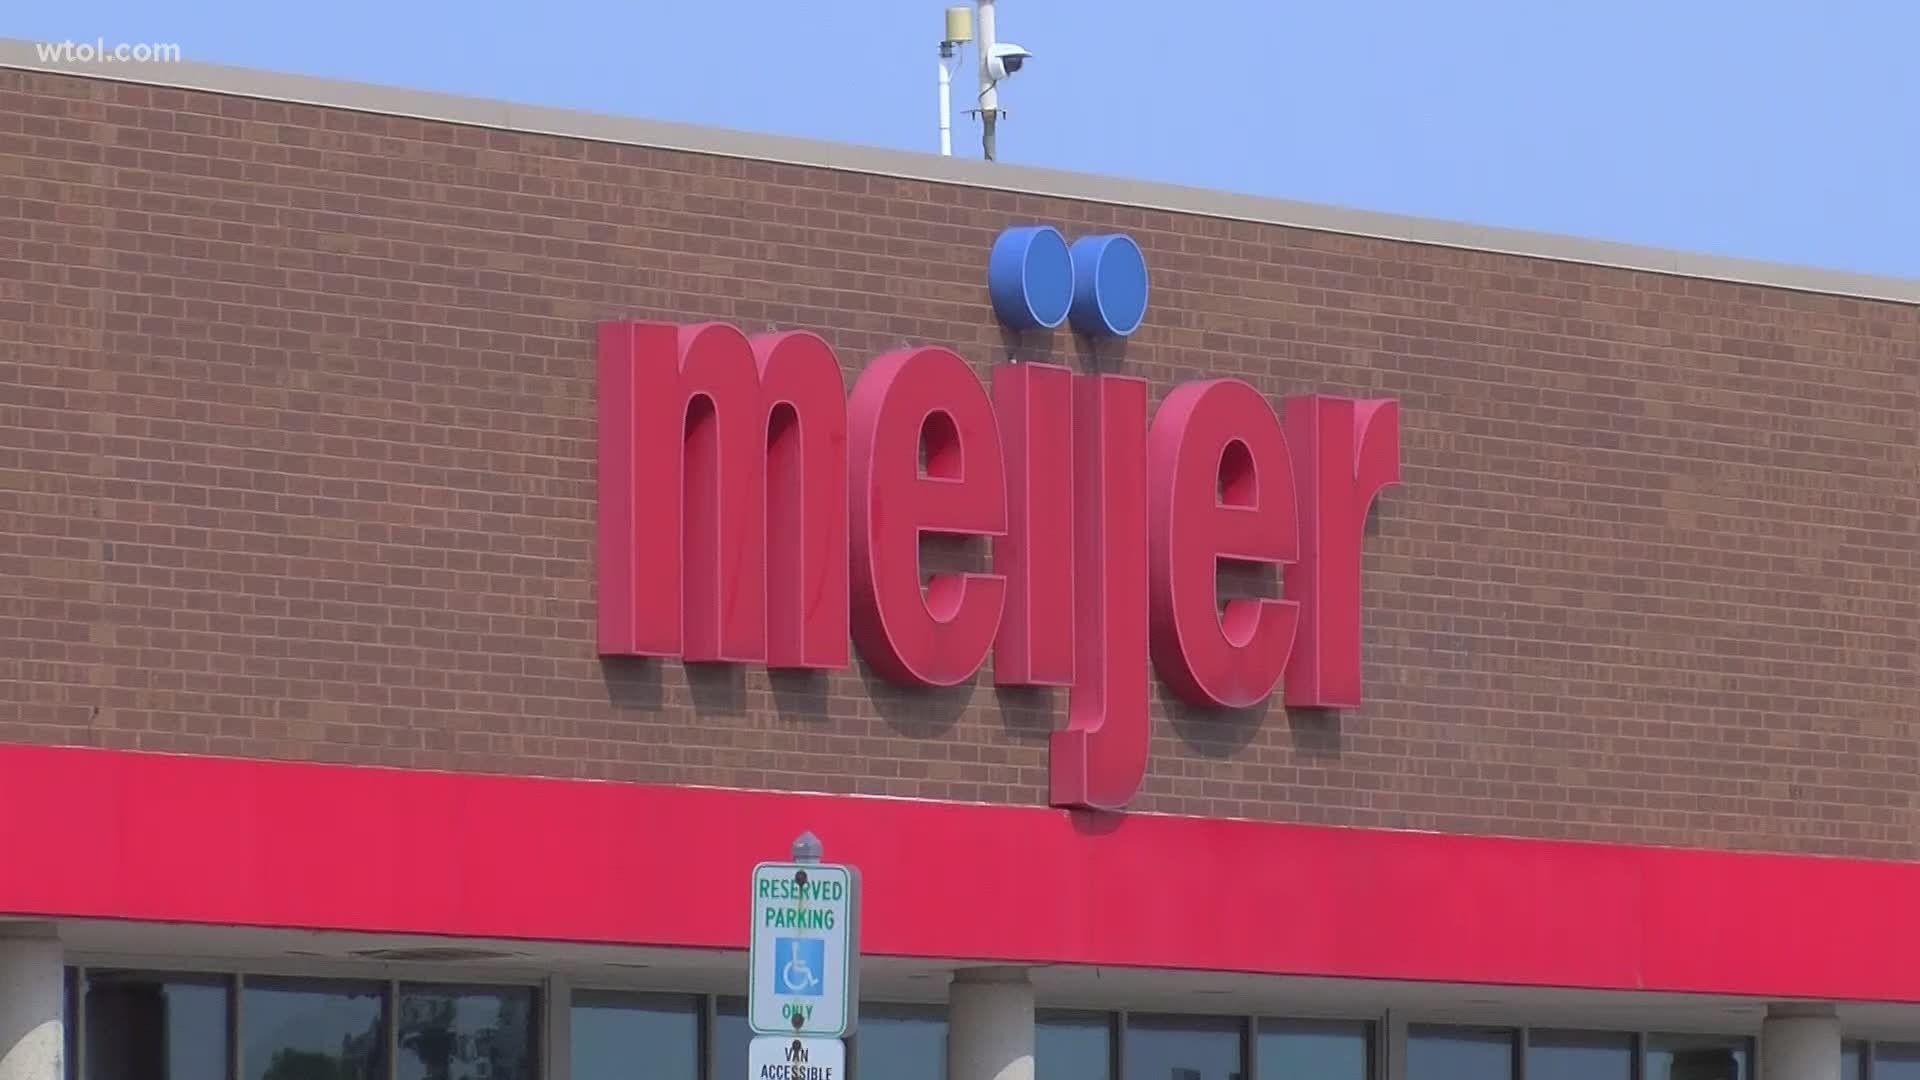 A motive is not yet clear as police continue to investigate what caused a 29-year-old man to repeatedly stab and kill an elderly man at a Meijer store in Adrian.